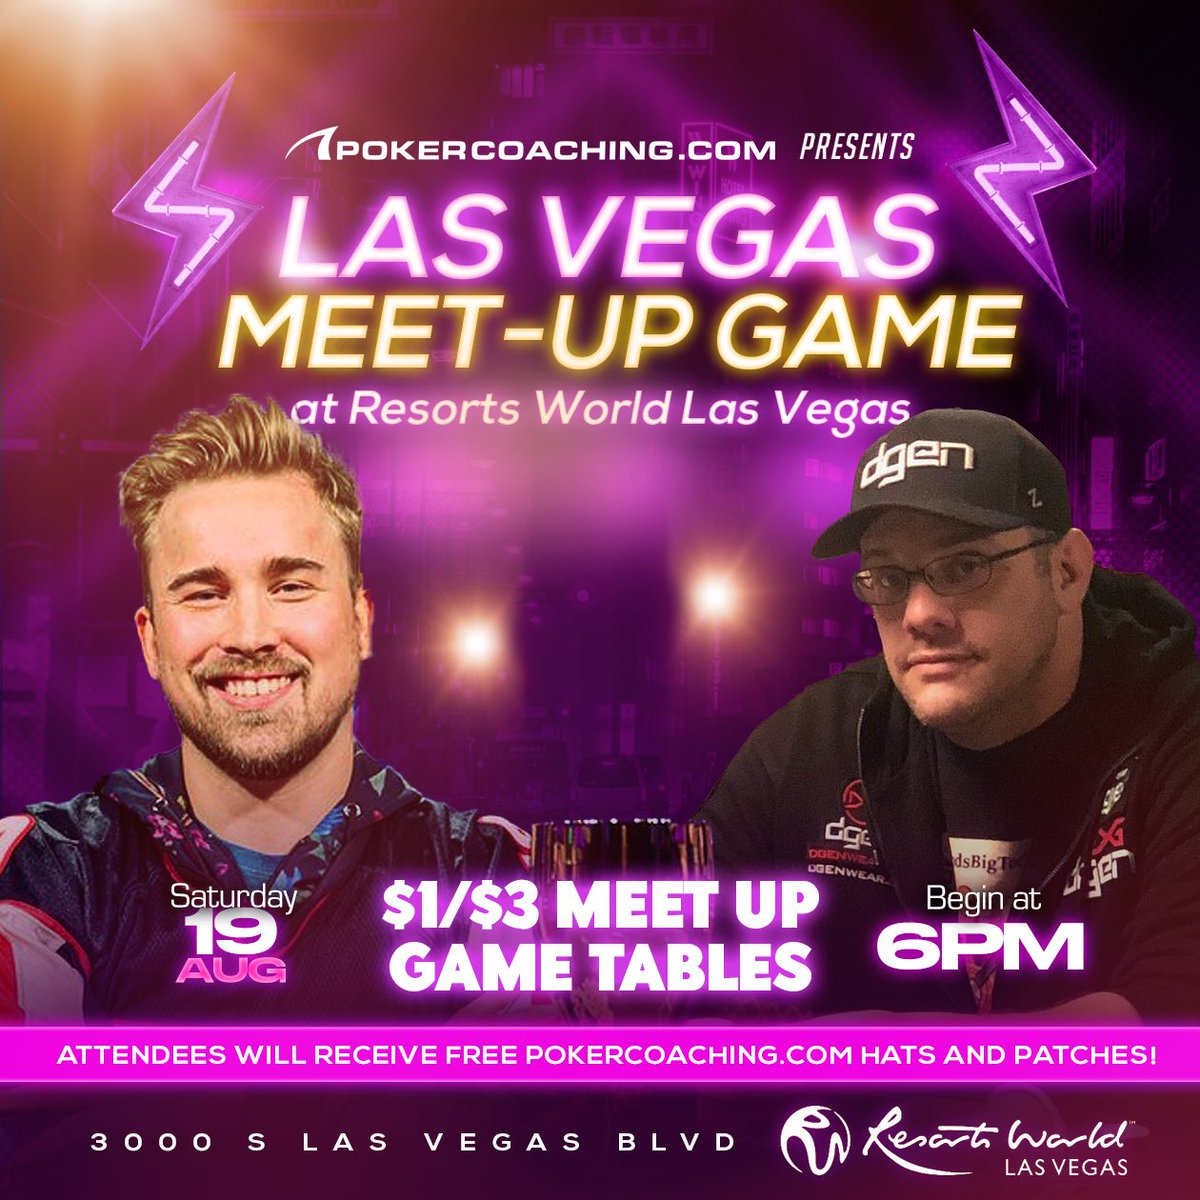 If any @PokerCoaching_ members want to put a dent in my bankroll, be at @PokerRoomRWLV this Saturday at 6 PM. Attendees will receive FREE PC gear and will have the chance to play with PokerCoaching coaches @AdamHendrix10 and @GodsBigToePoker